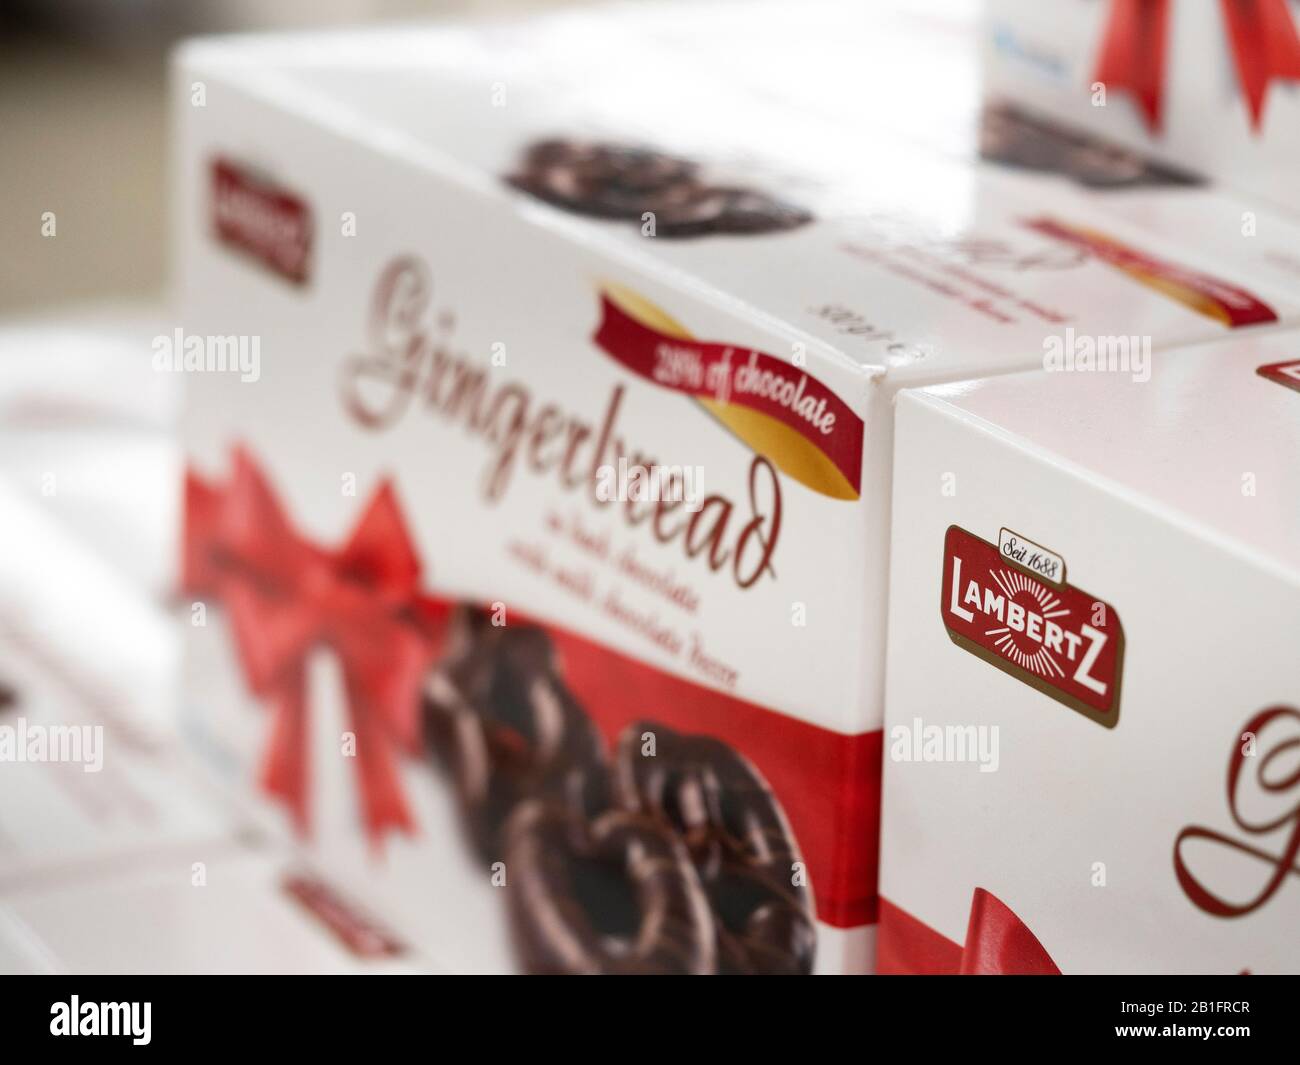 Chocolate Gingerbread Boxes Lambertz on a shelf in a store Stock Photo